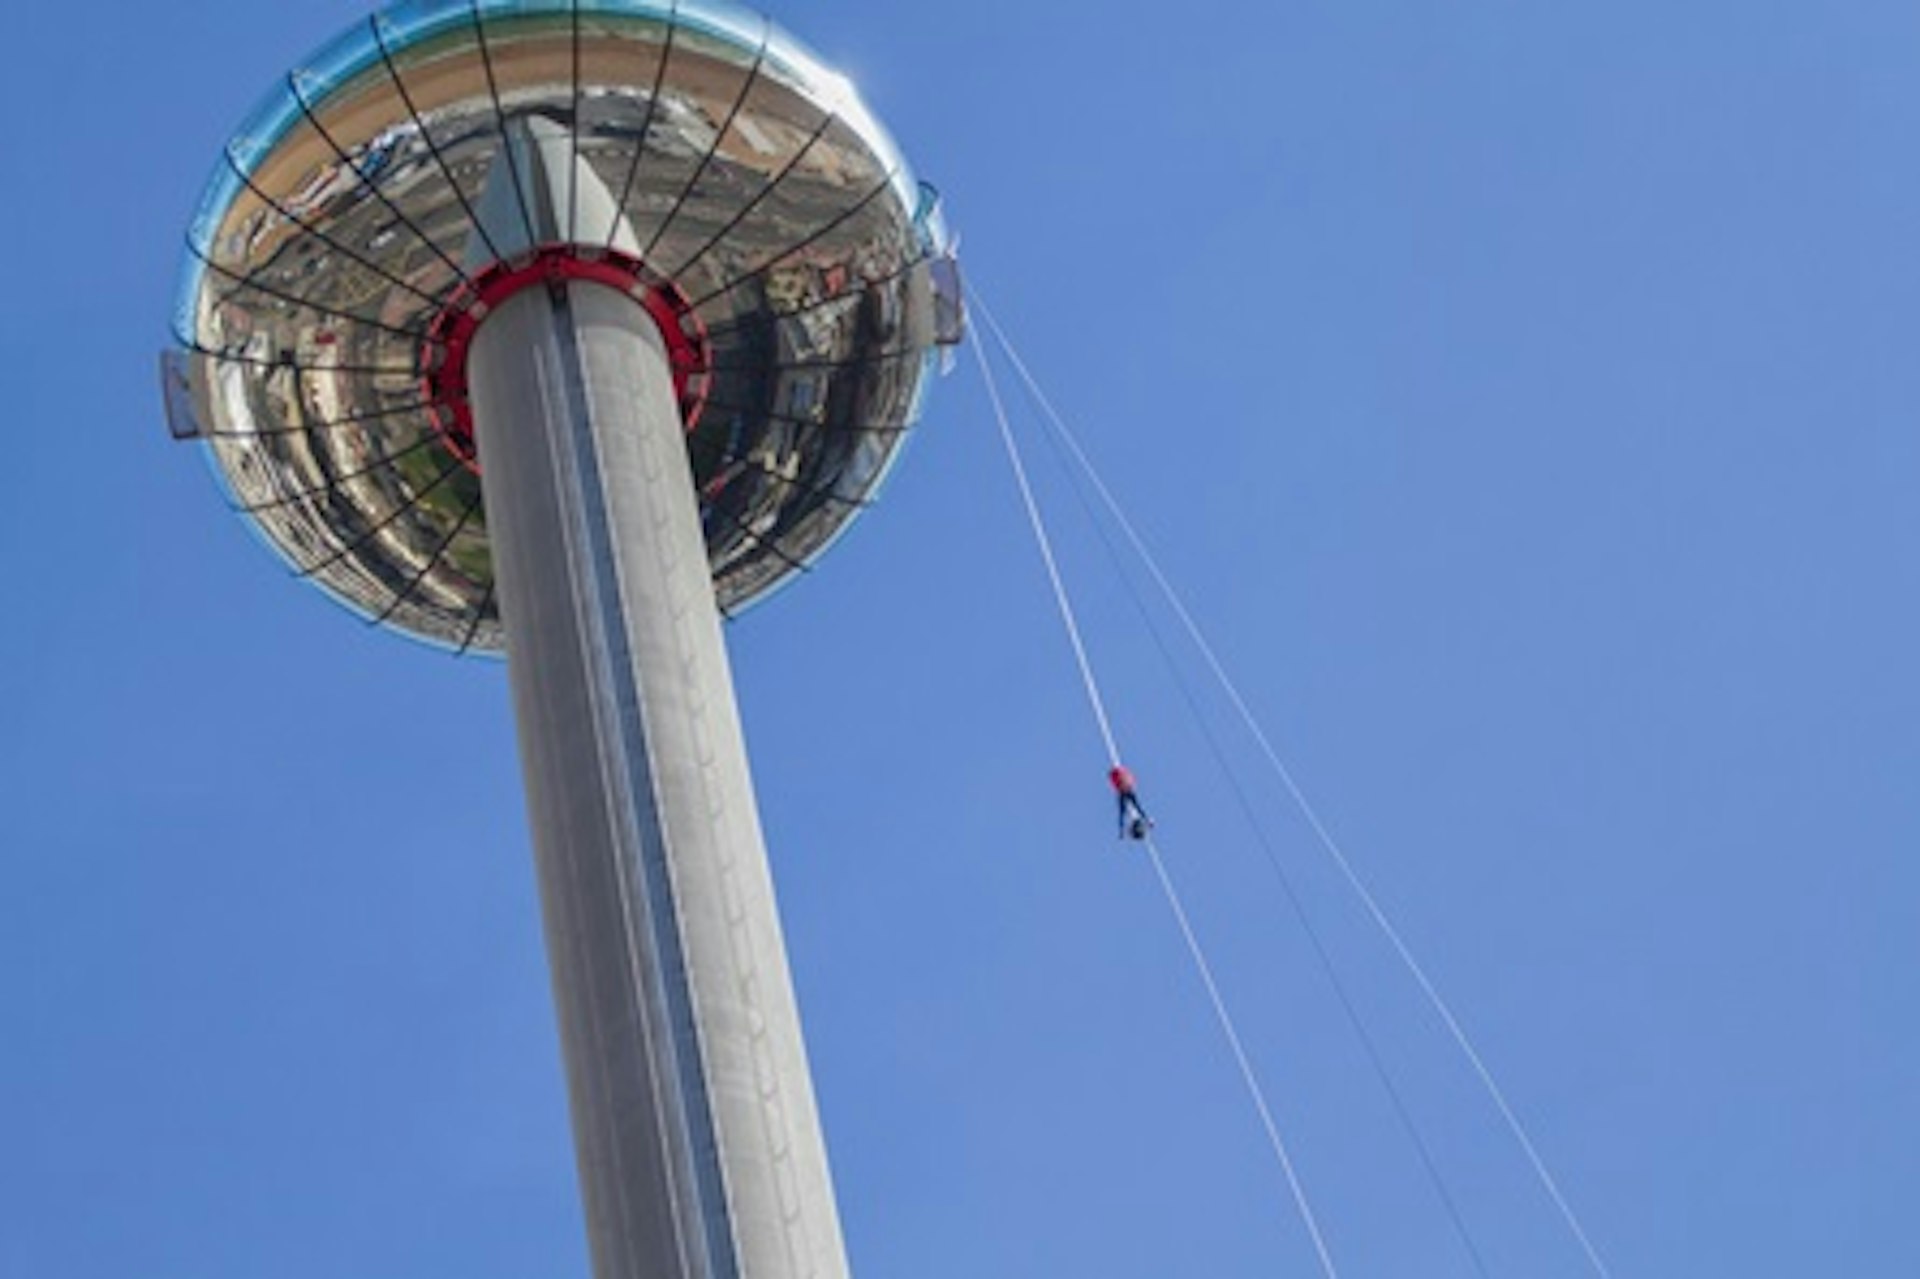 iDrop Abseil Experience at the British Airways i360 for Two 2